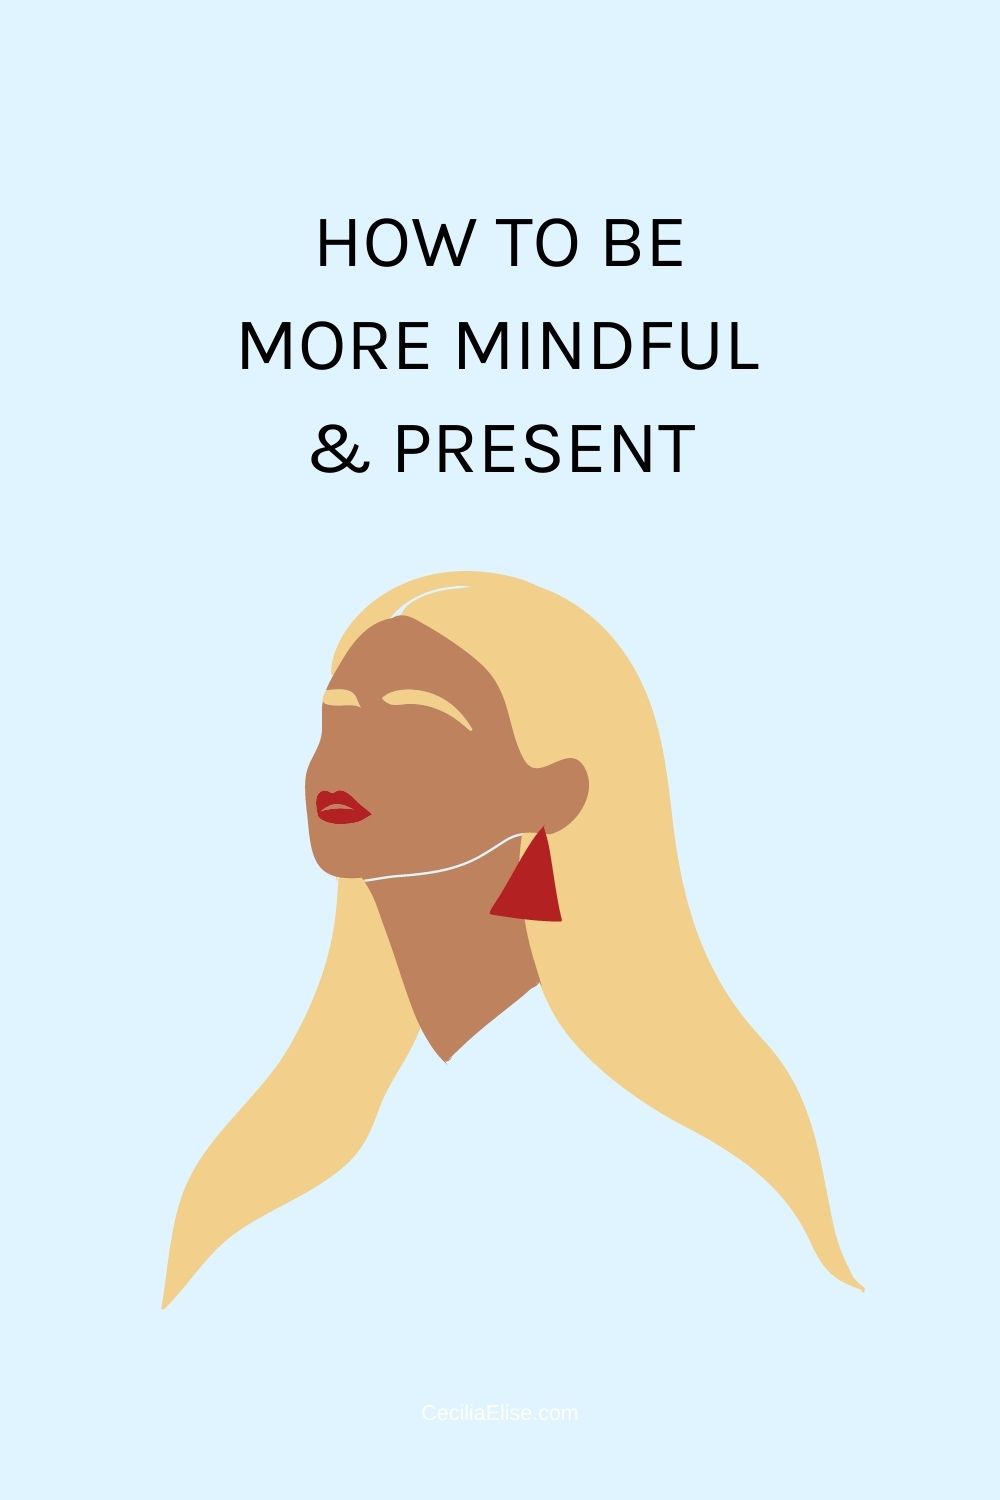 How to be more mindful and present